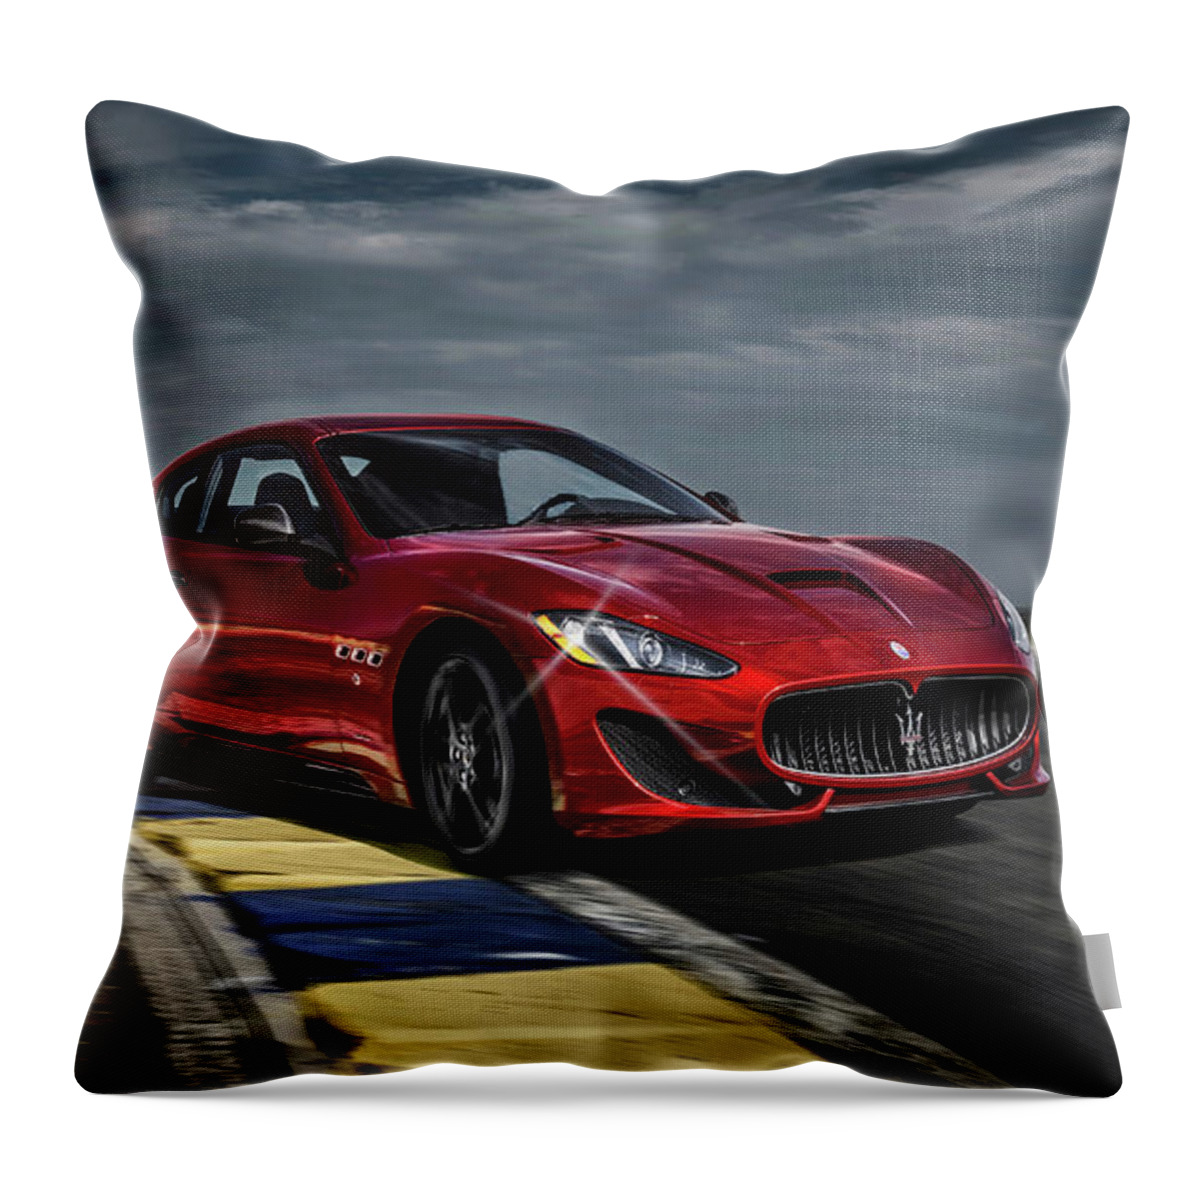 Maserati Throw Pillow featuring the photograph Maserati Gran Turismo G T Sport by Movie Poster Prints